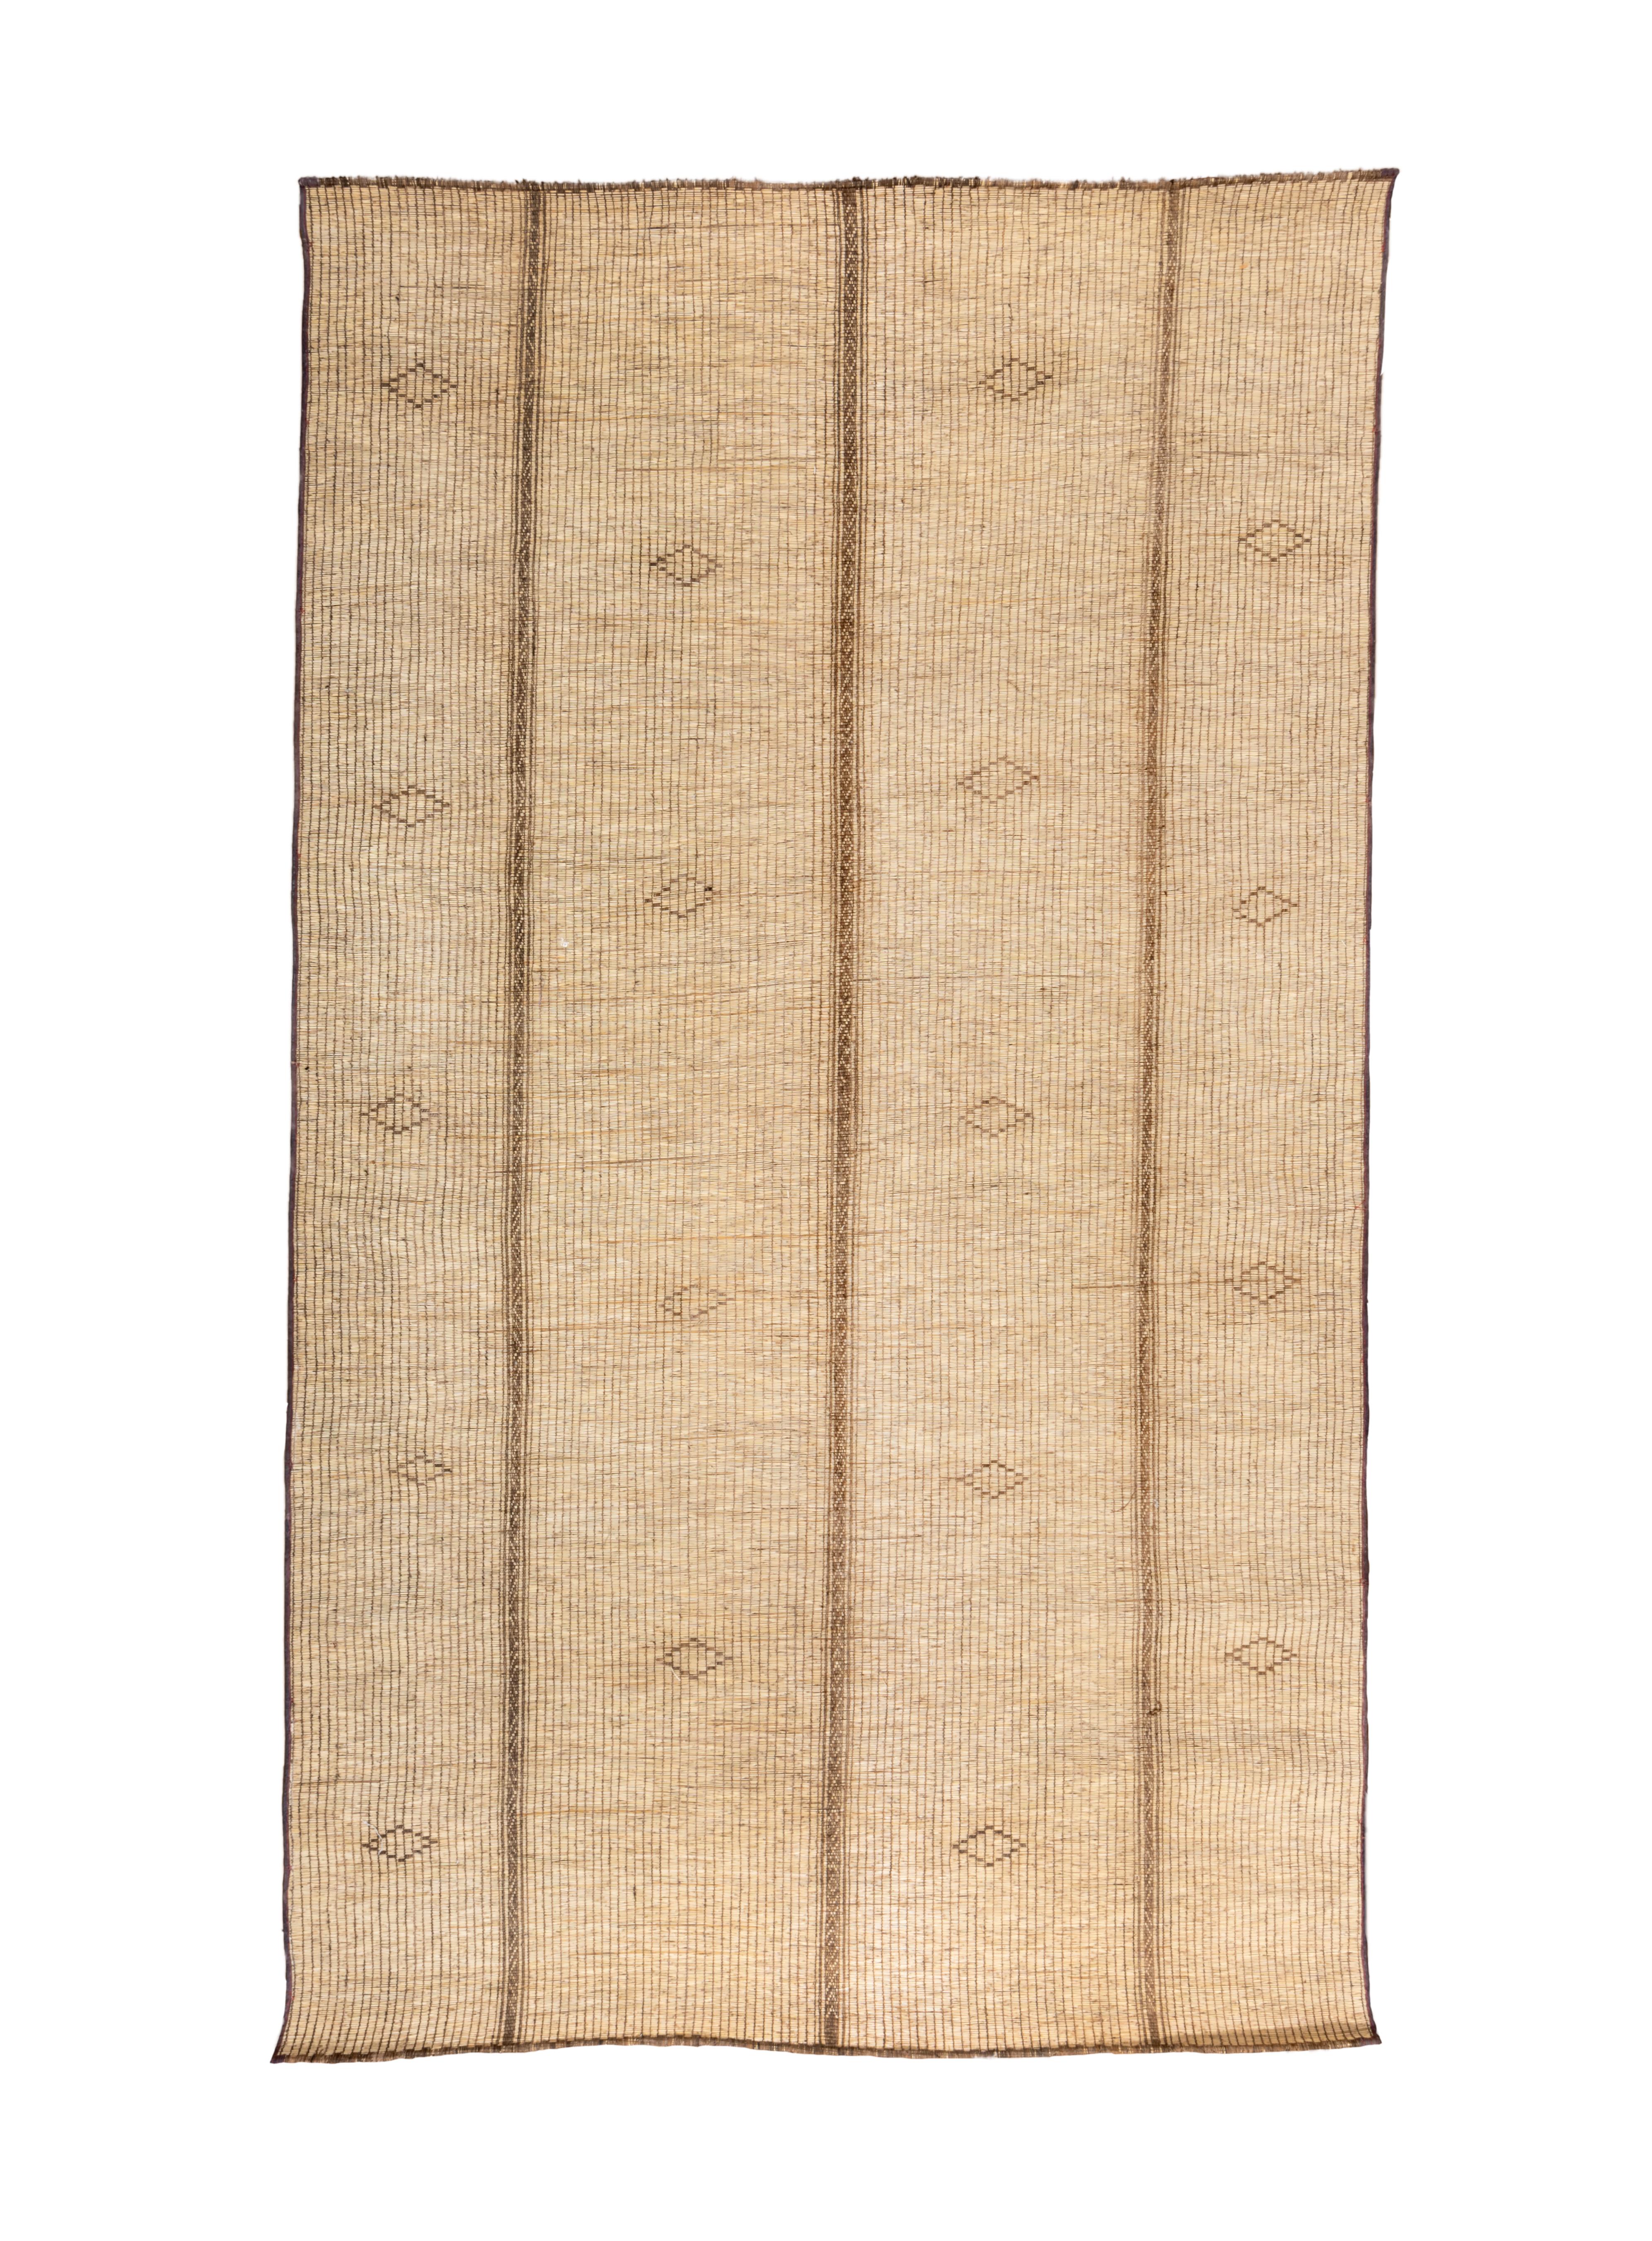 One advantage of reed rugs is that they can be rolled up easily and are lightweight, hence perfect to nomadic tribesfolk. Here the creamy beige reedwork field is vertically divided into two wide and two narrower panels, all with simple small open